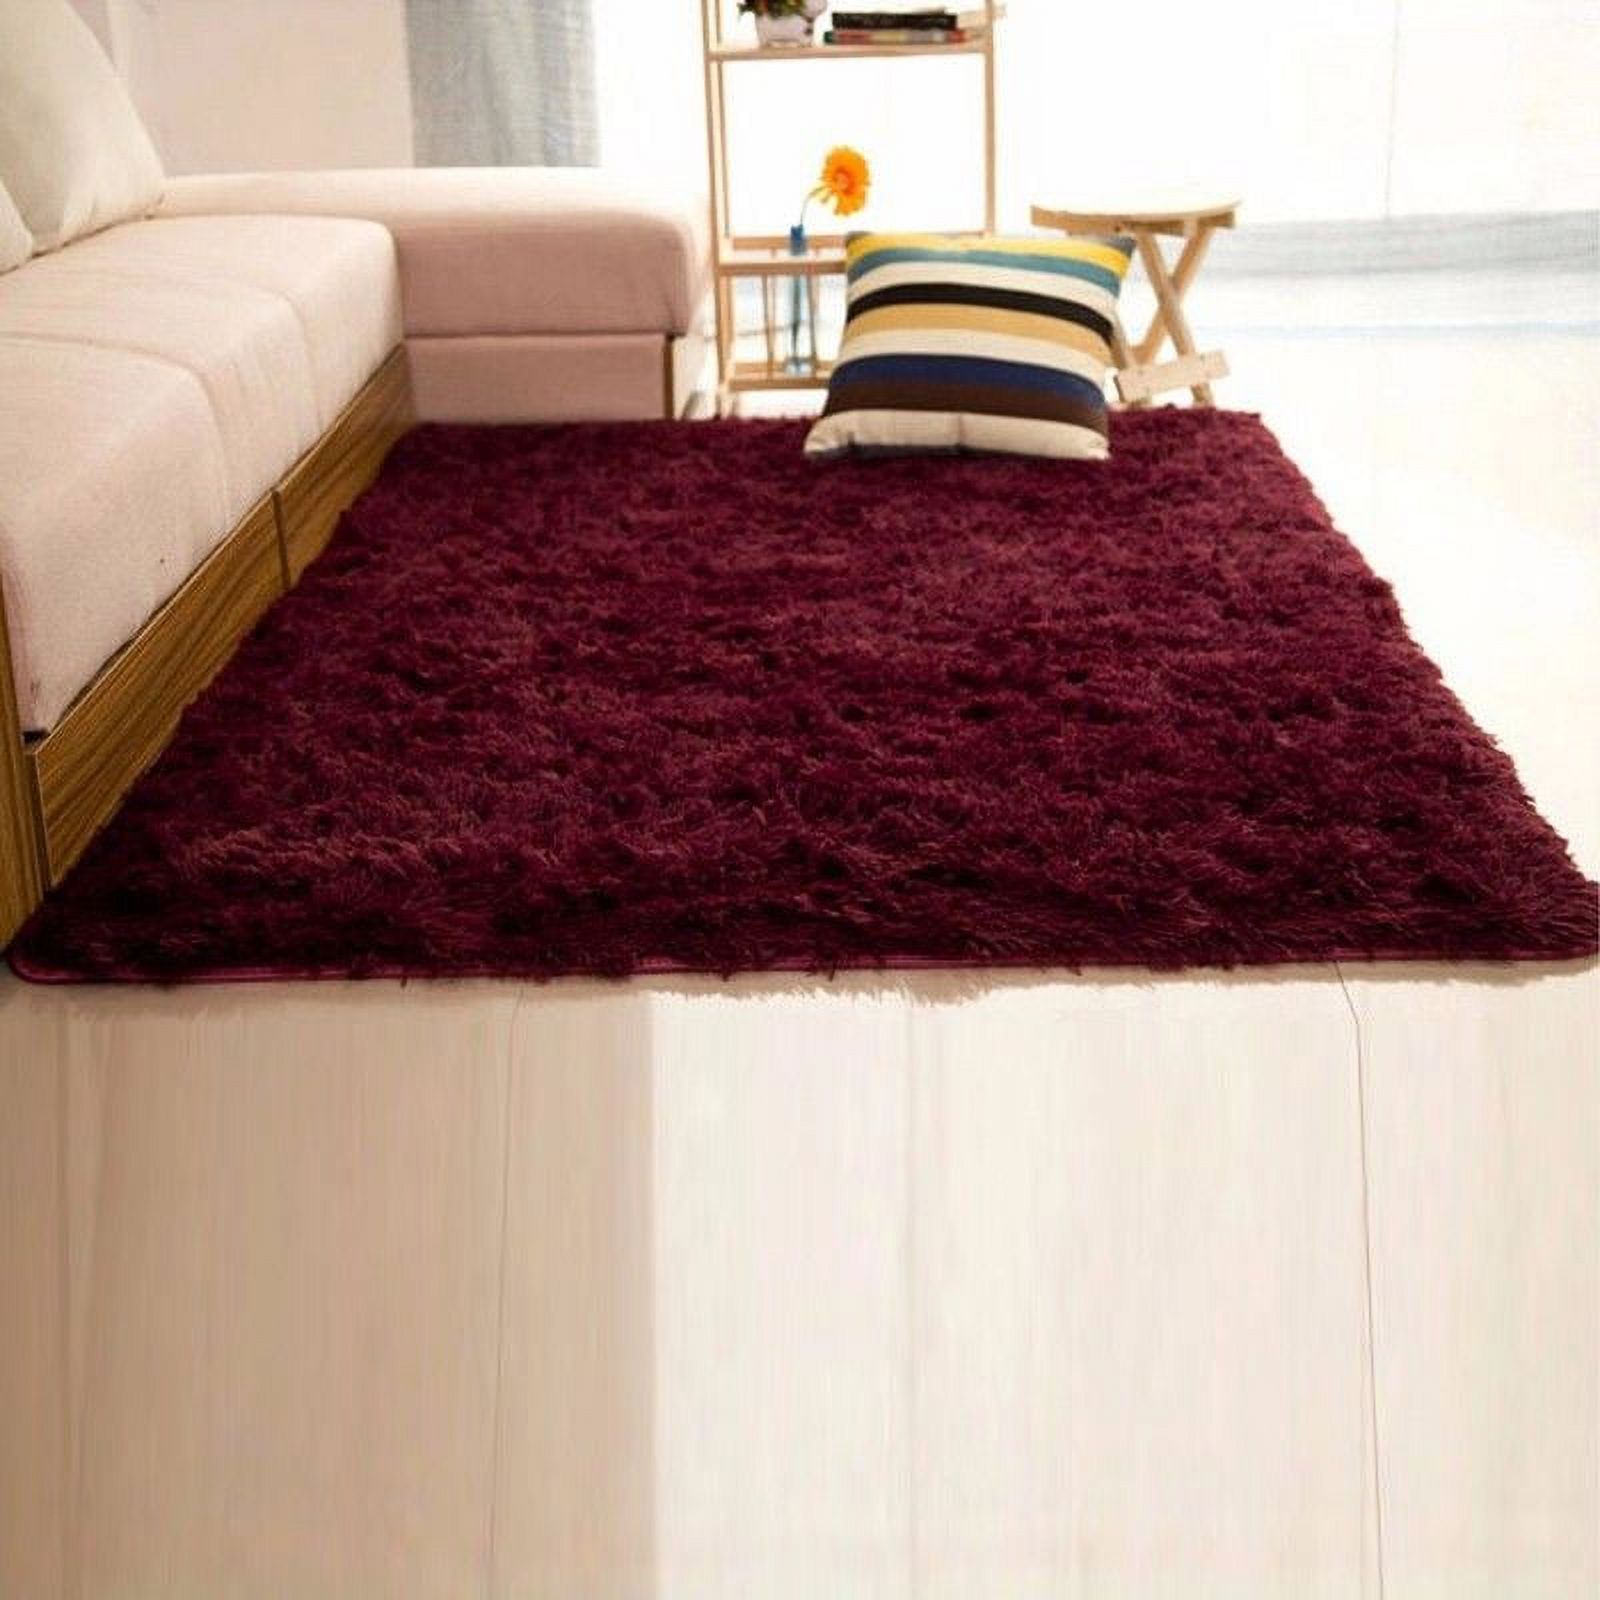 NK Home Rugs 16x24'' Rectangle Oblong Shape Bedroom Fluffy Rugs Anti-Skid Shaggy Area Home Decration Office Sitting Drawing Room Gateway Door Carpet Play Mat Red , Small Rug - image 1 of 3